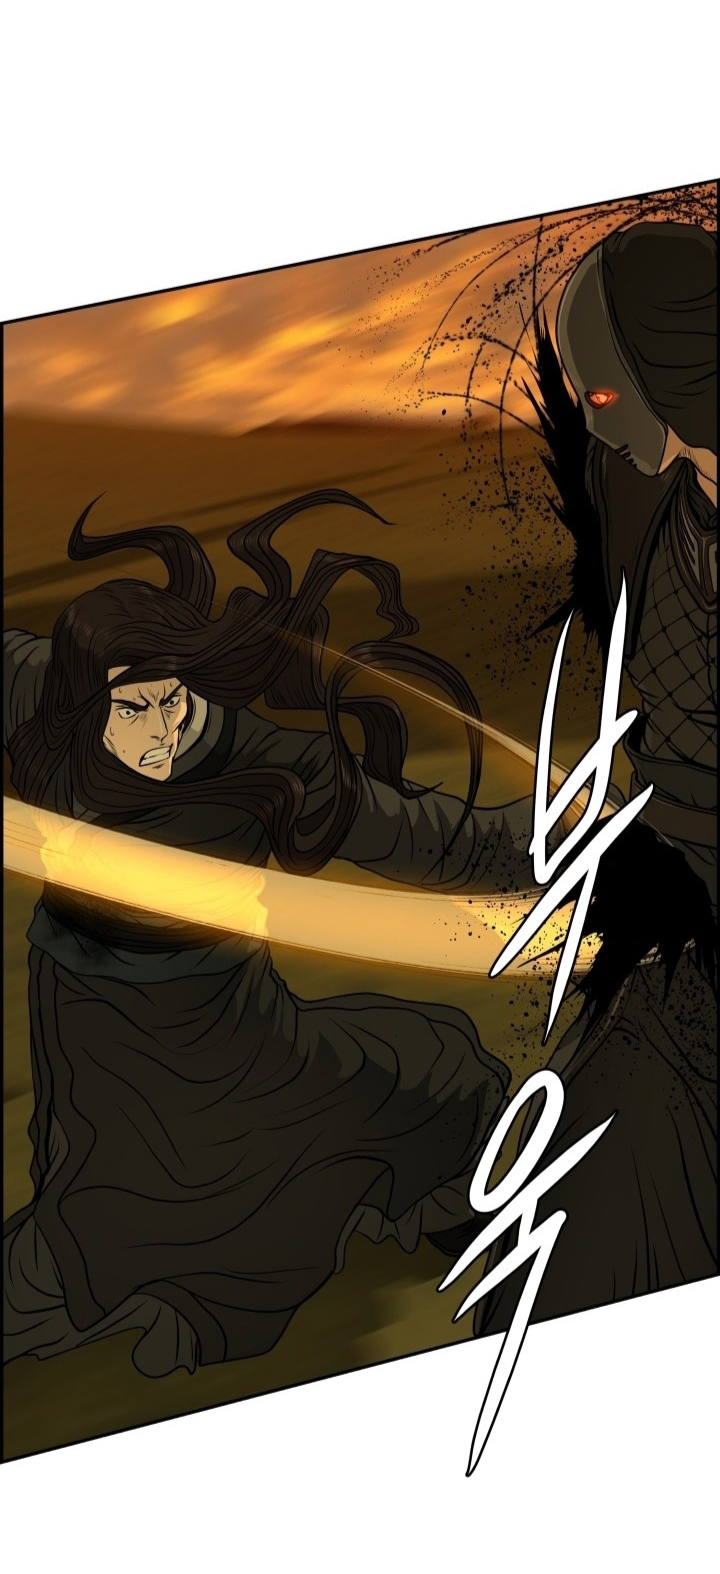 Blade of Wind and Thunder 28 (3)